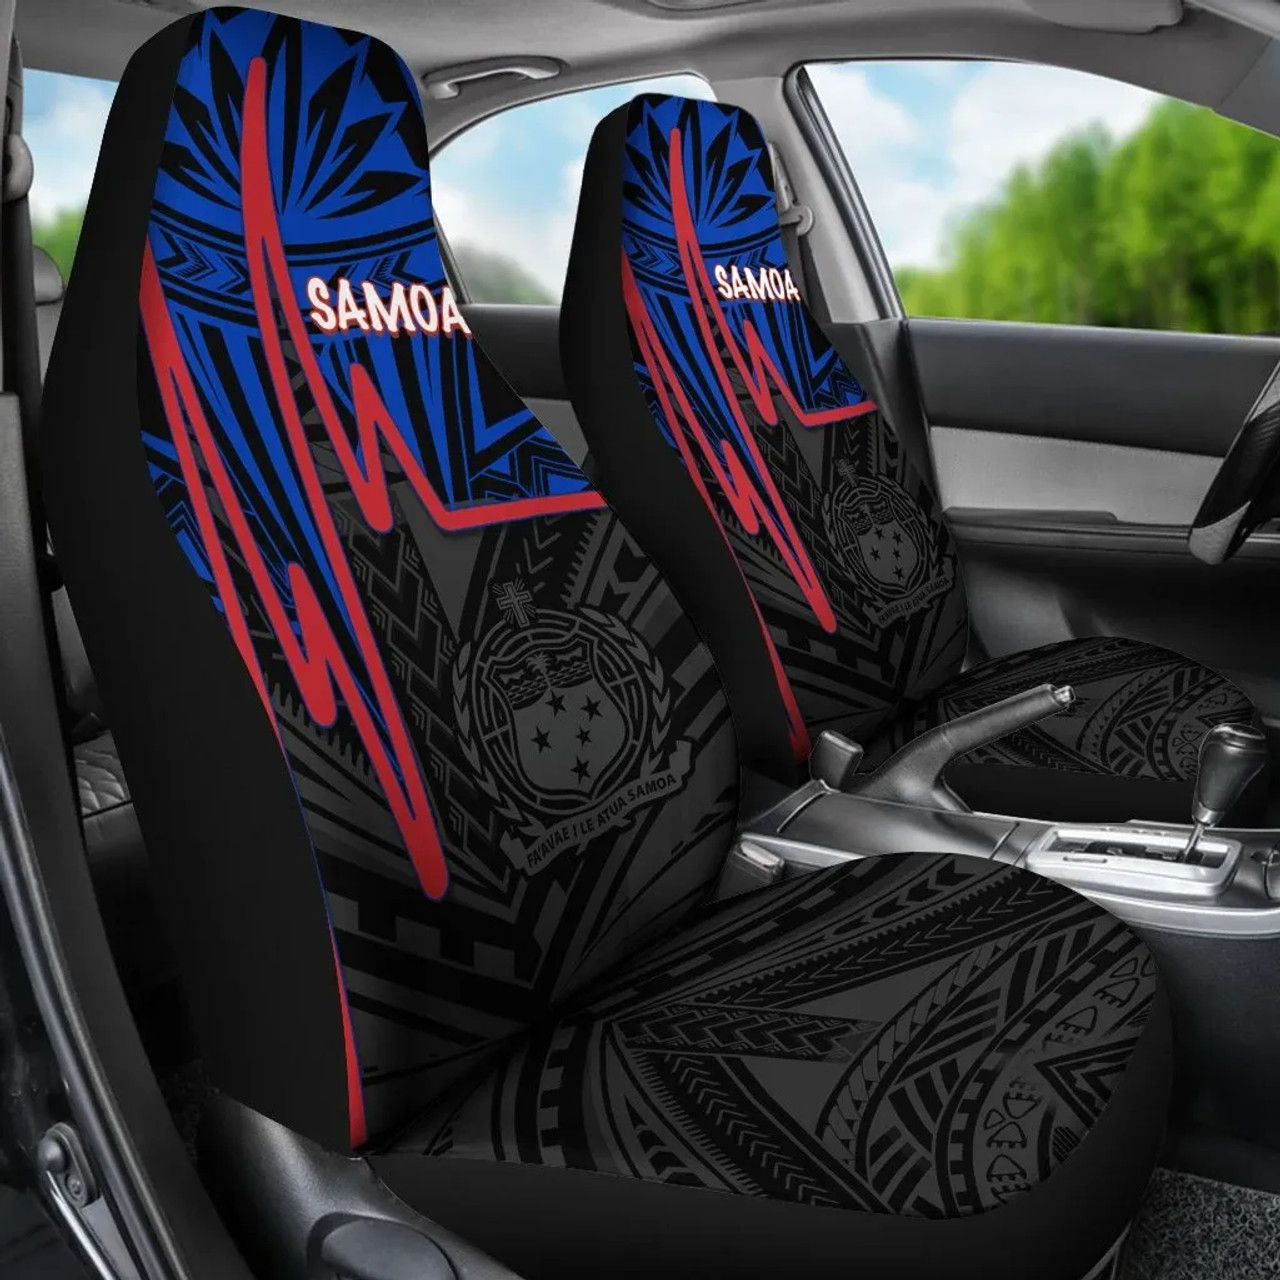 Samoa Car Seat Covers - Samoa Seal With Polynesian Patterns In Heartbeat Style (Blue)